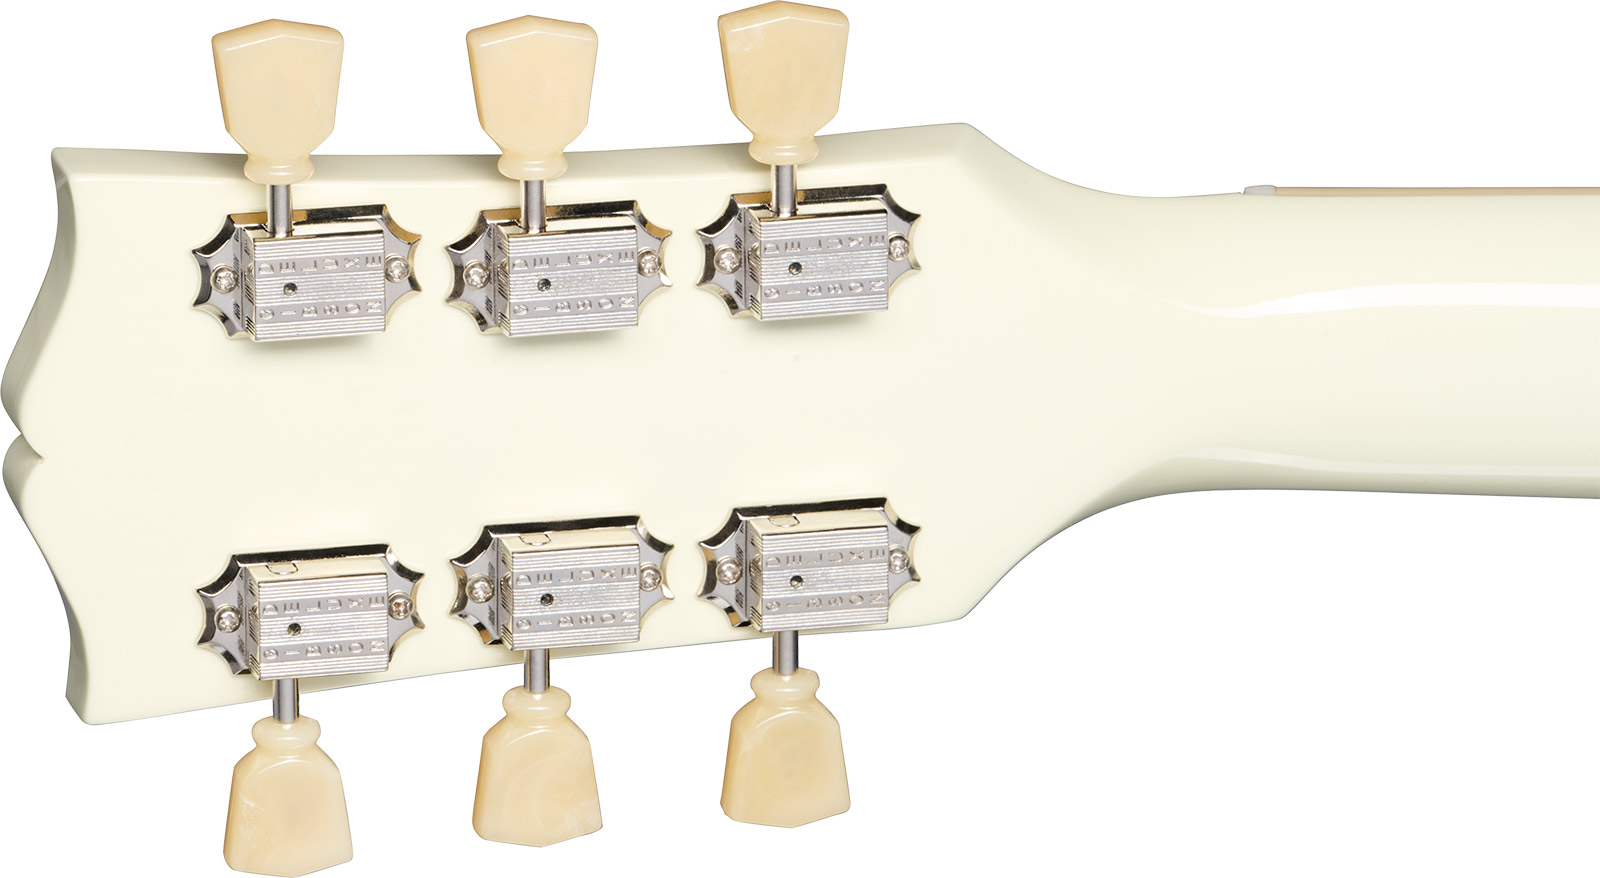 Gibson Sg Standard 1961 Custom Color 2h Ht Rw - Classic White - Double cut electric guitar - Variation 4